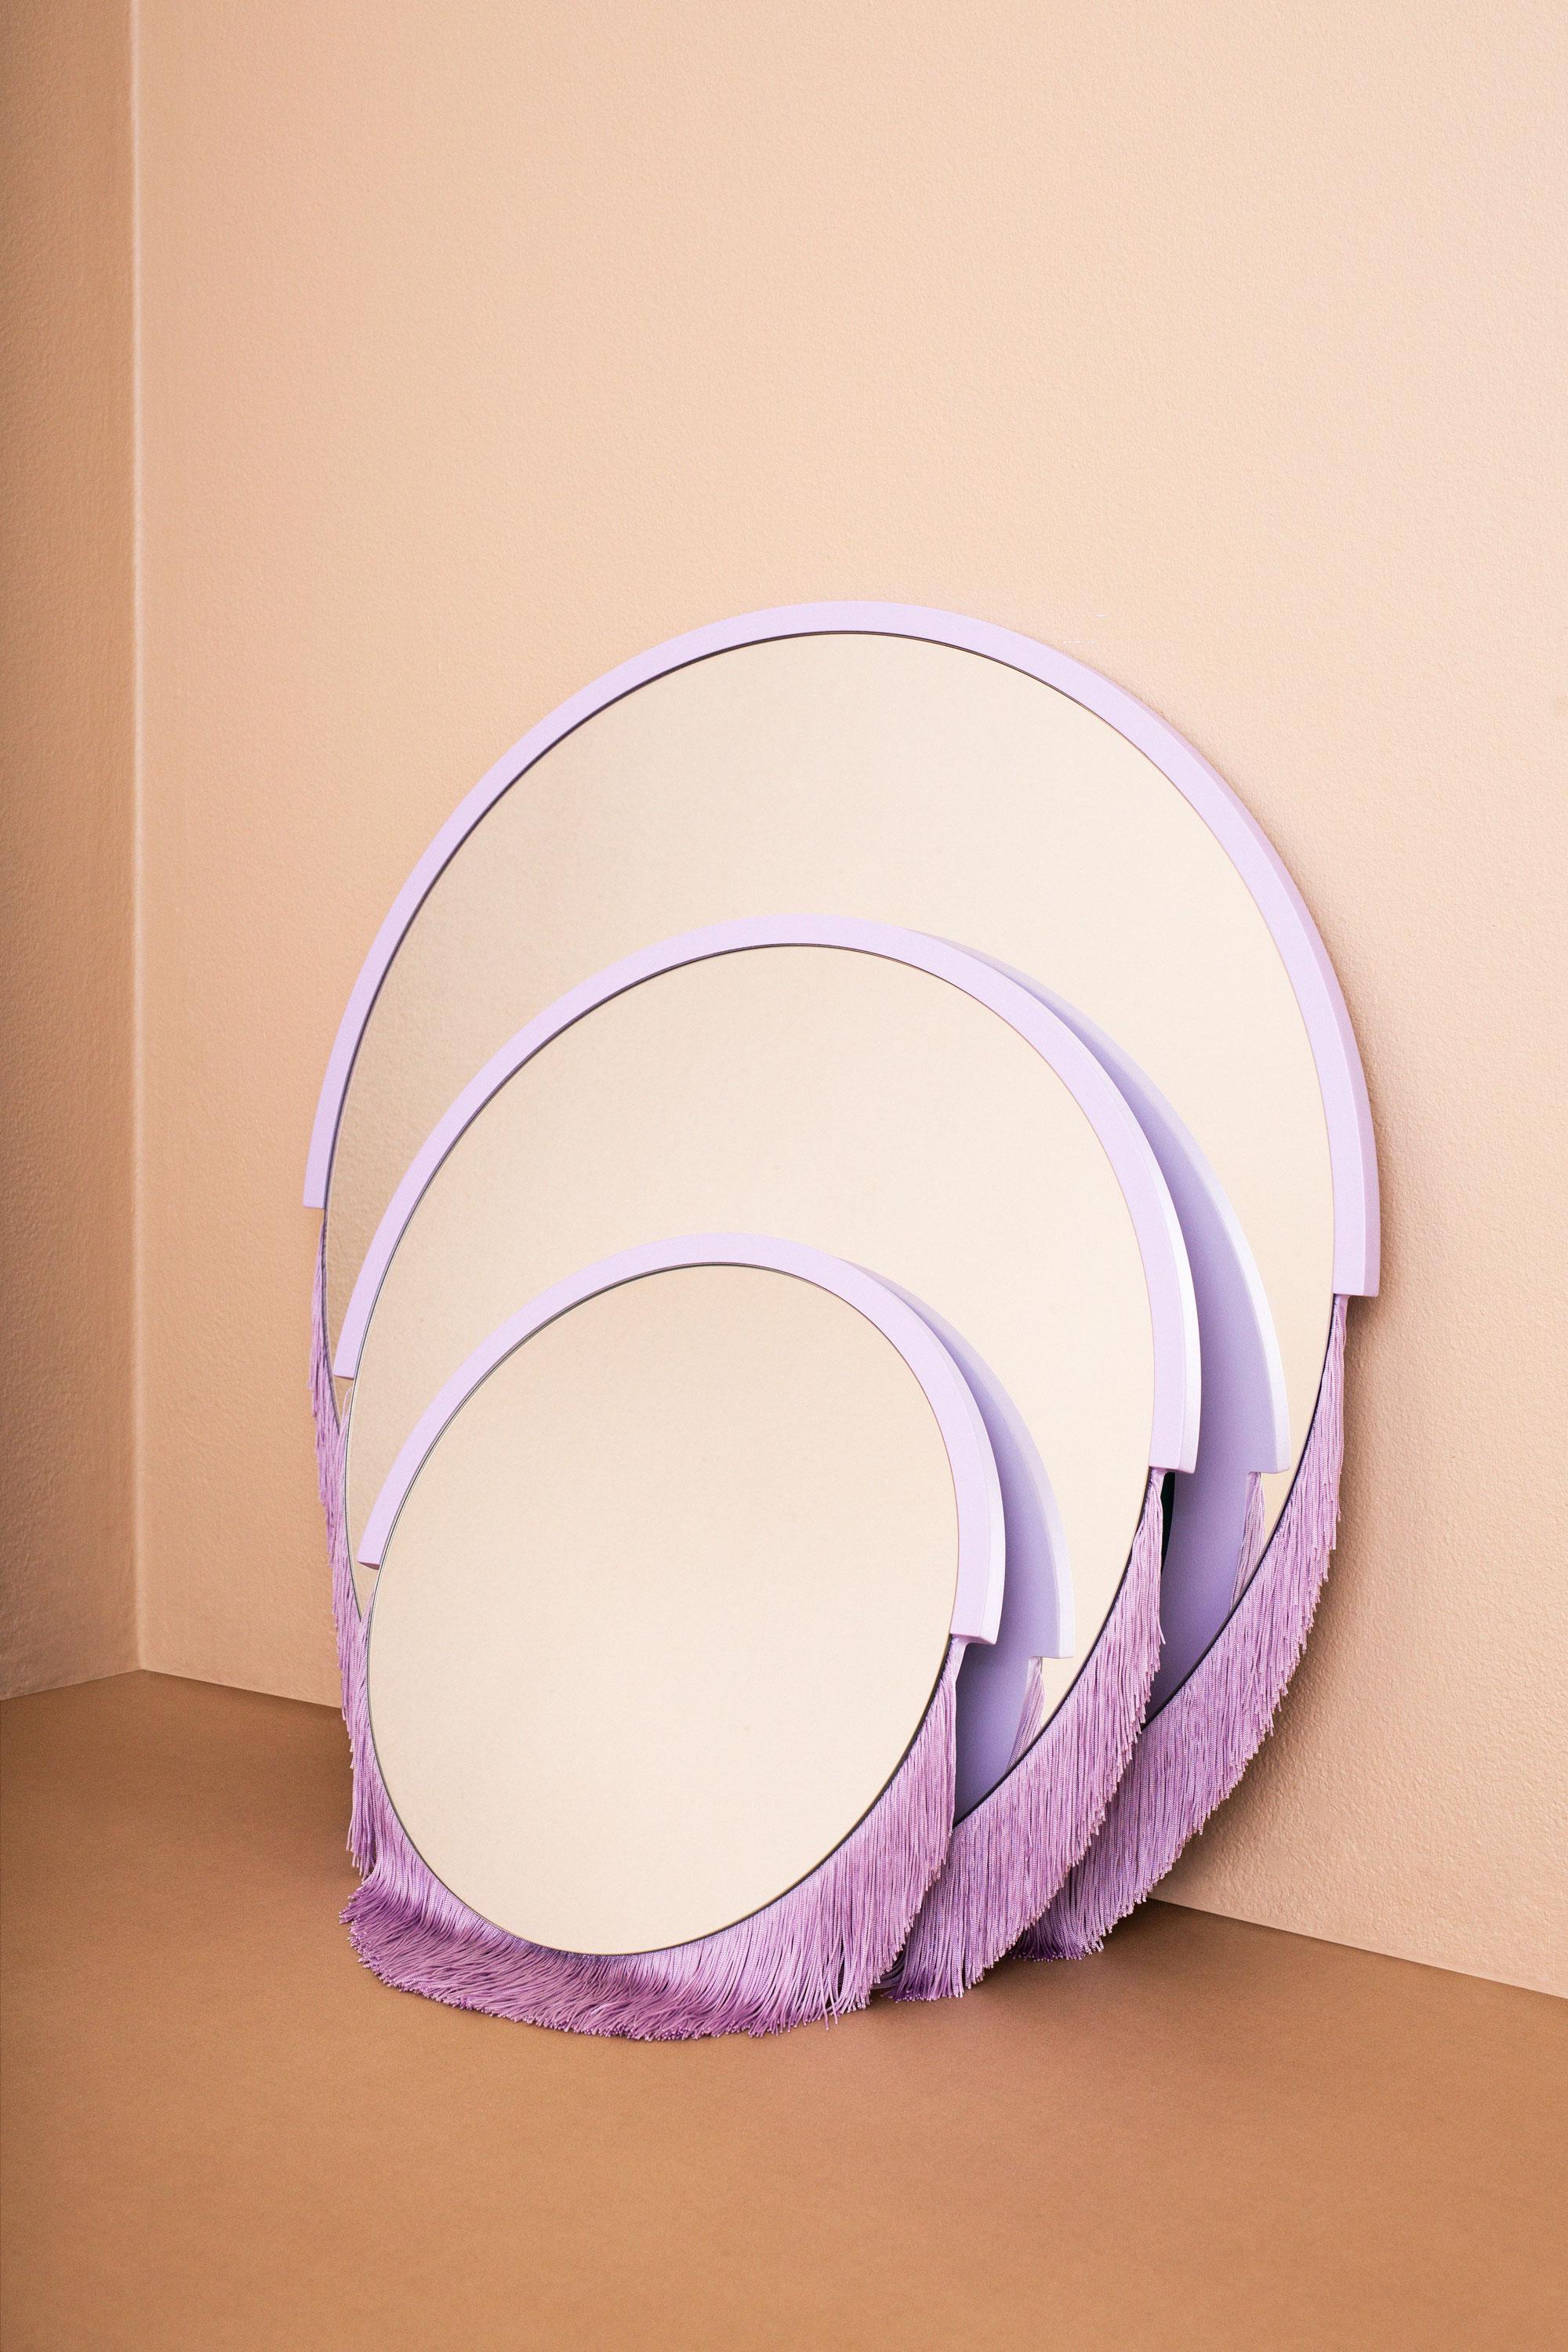 Finnish Set of 4 Boudoir Wall Mirrors by Tero Kuitunen For Sale